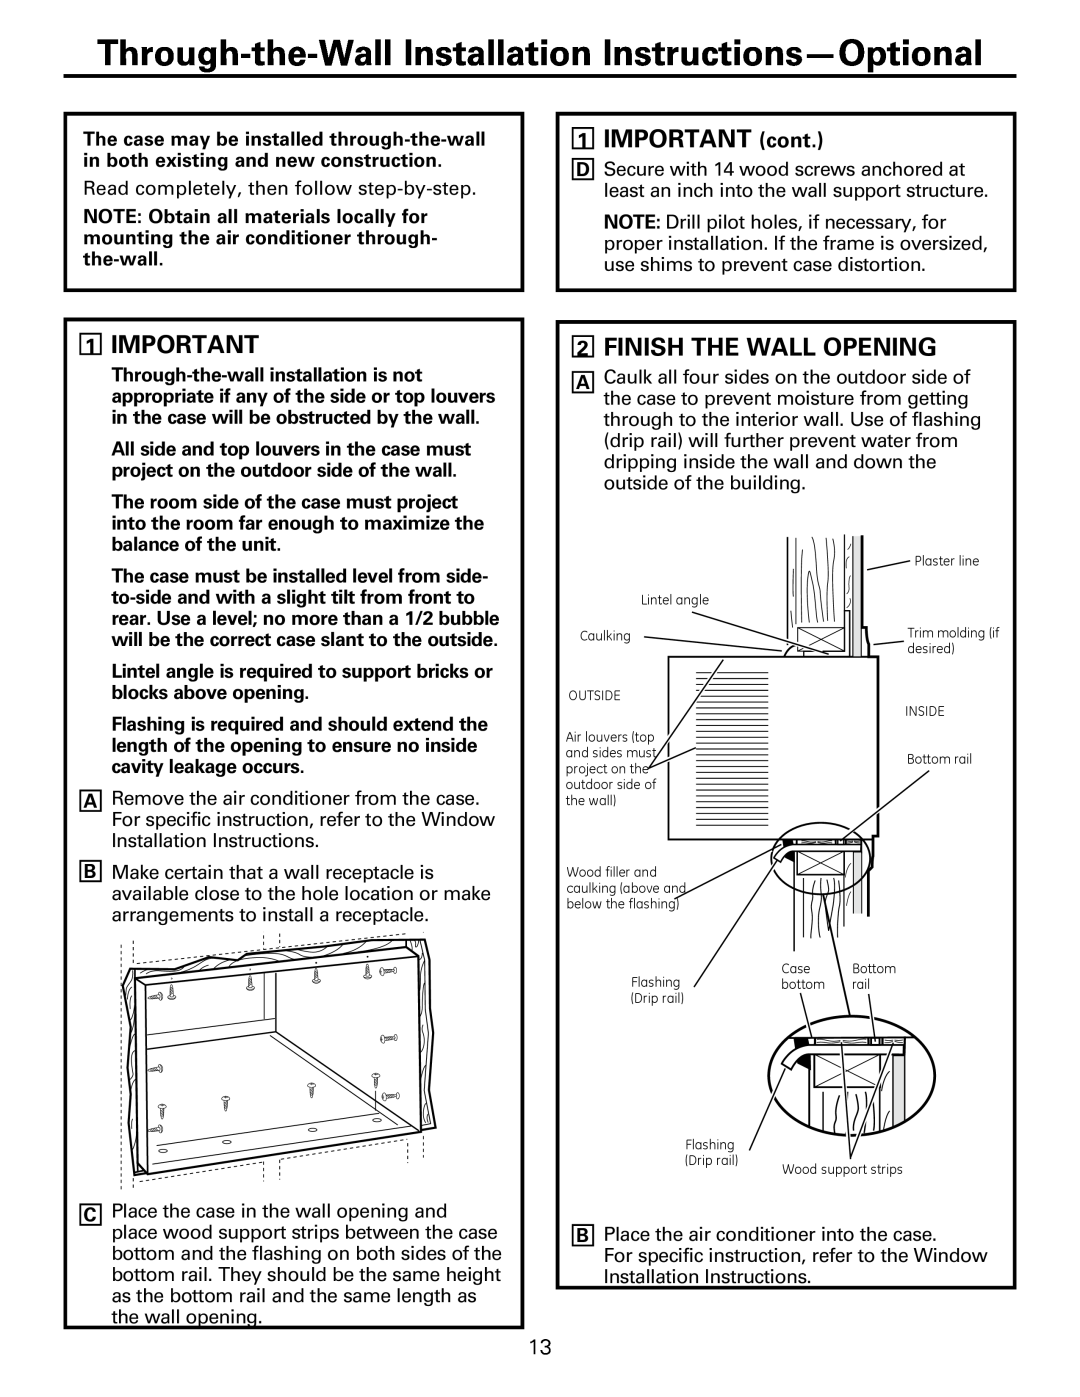 GE AEM25, AEQ25 operating instructions IMPORTANT cont, 1IMPORTANT, Finish The Wall Opening 